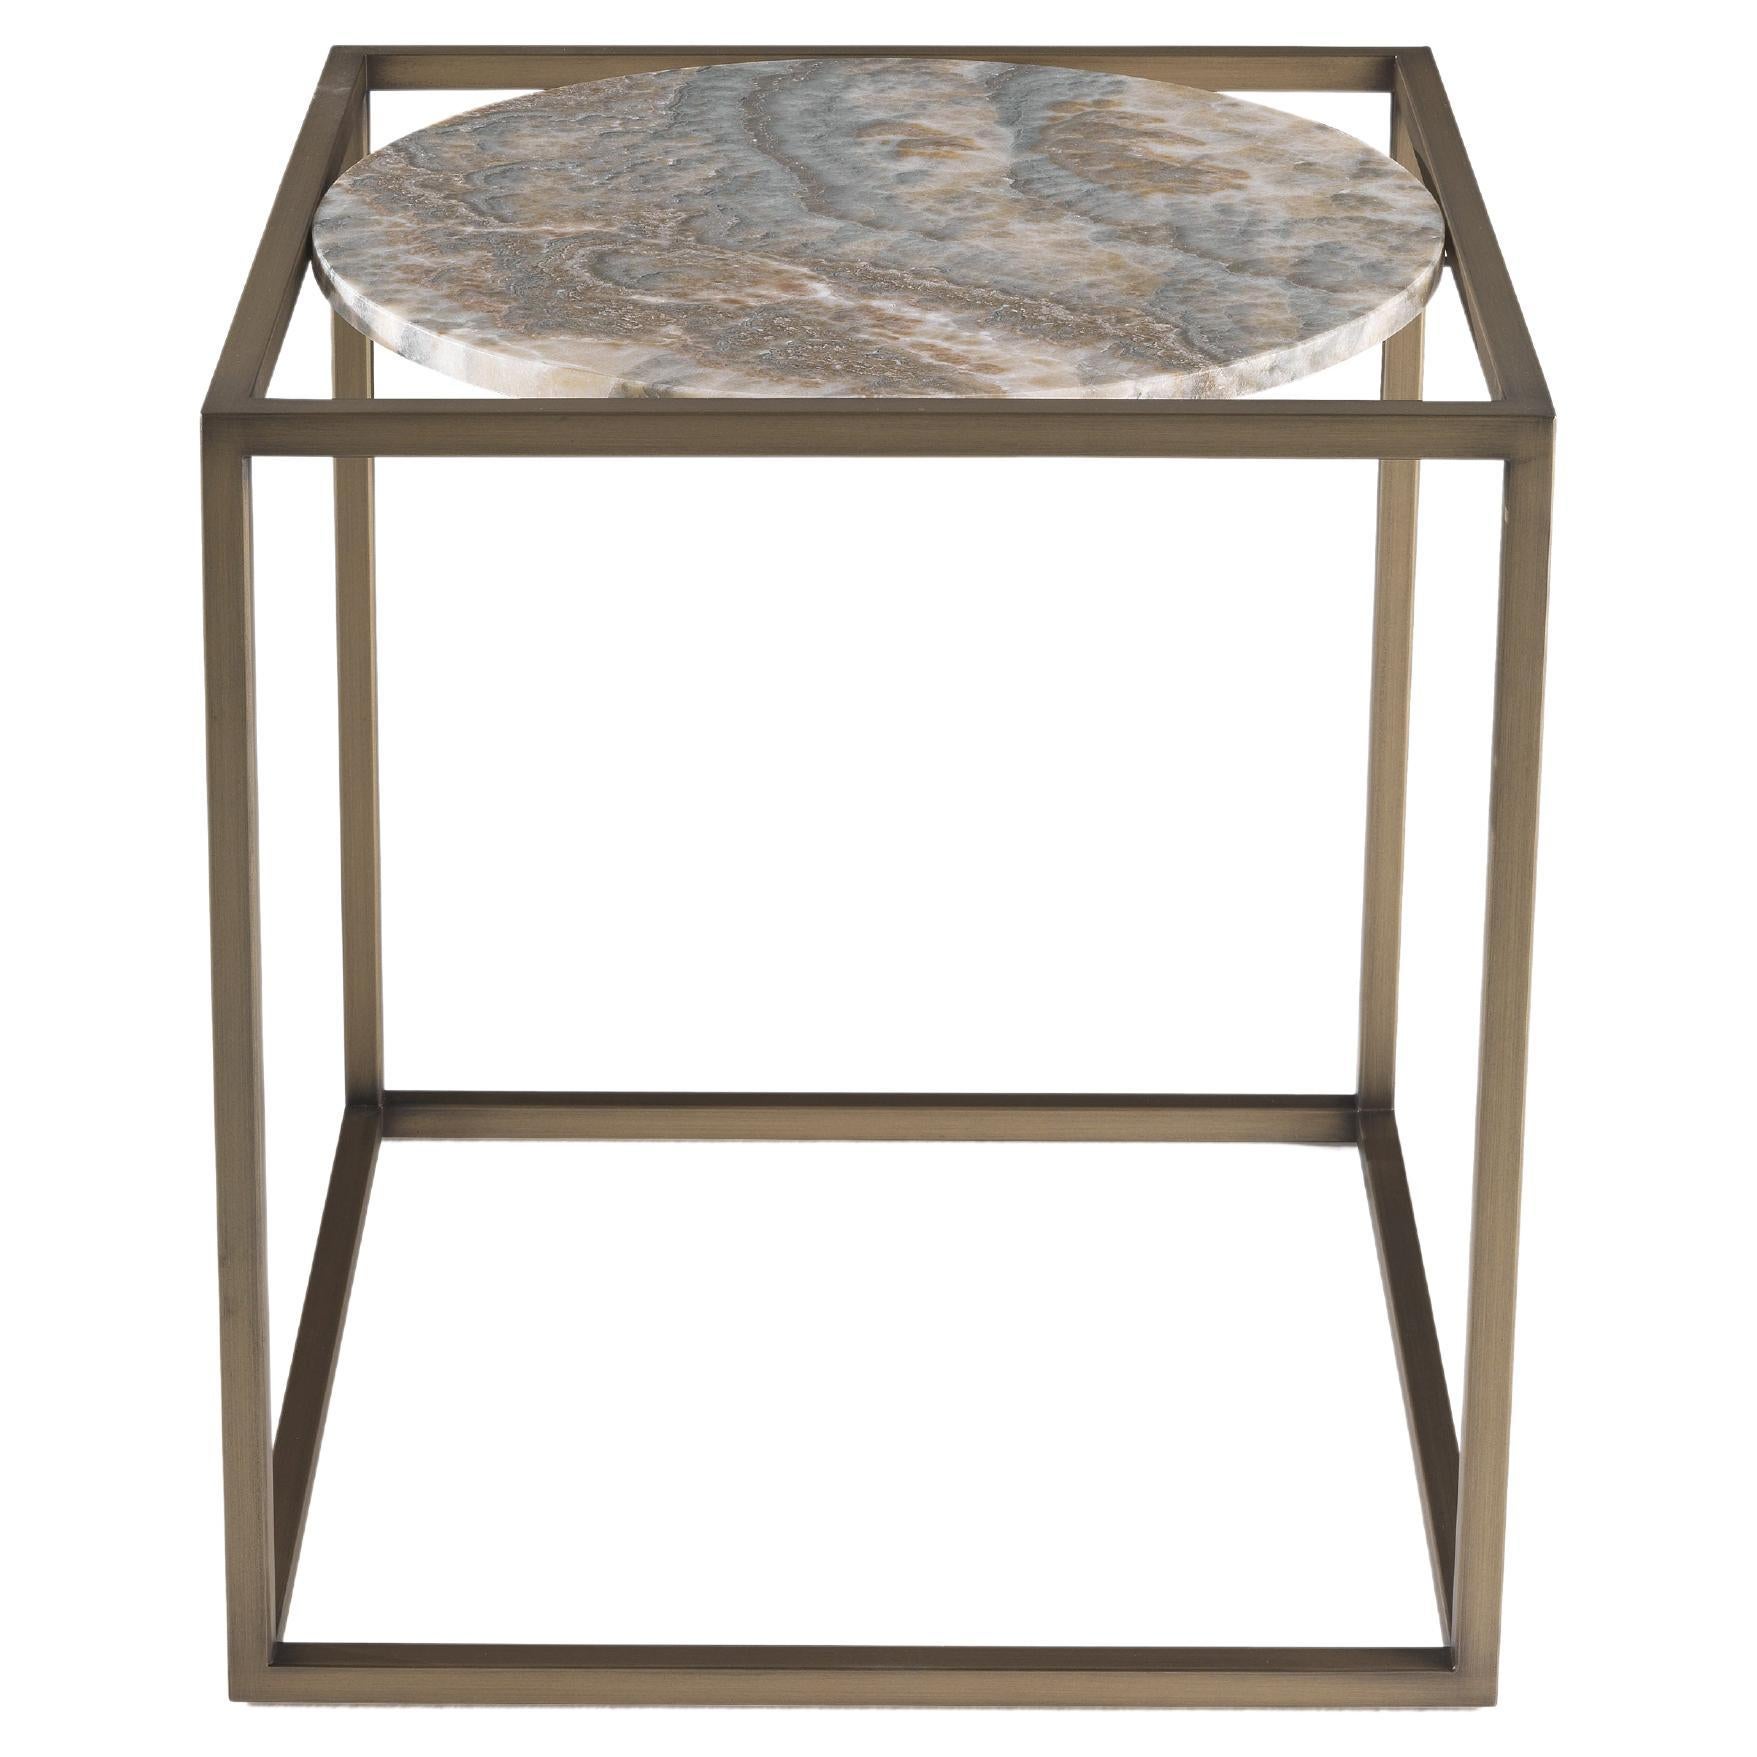 21st Century Norrebro Side Table with Cloudy Onyx Top by Gianfranco Ferré Home